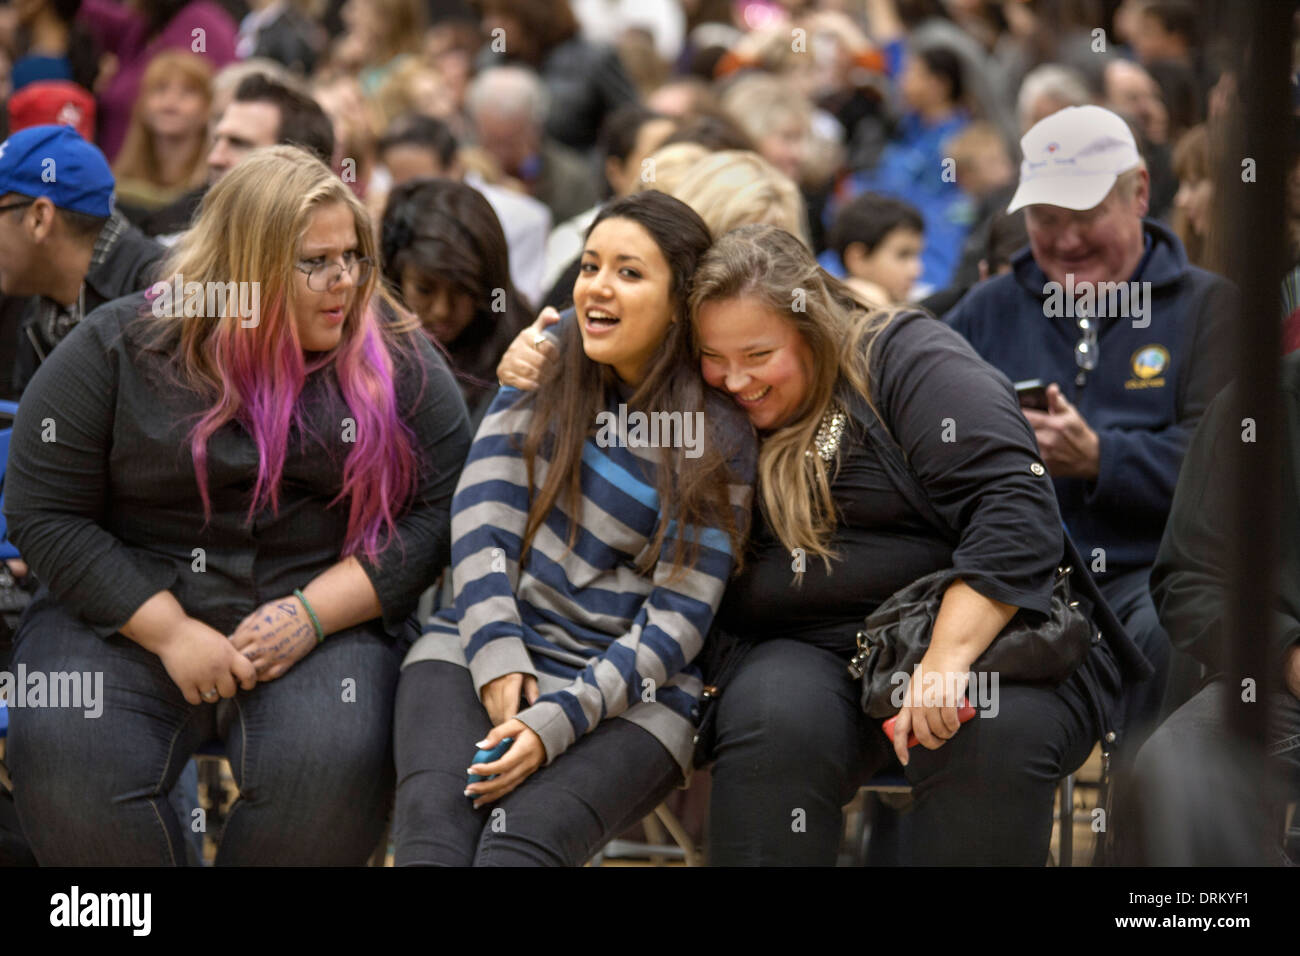 Two 'plus-size' teen girls share a laugh with a friend at a high school concert in Aliso Viejo, CA. Note purple hair. Stock Photo